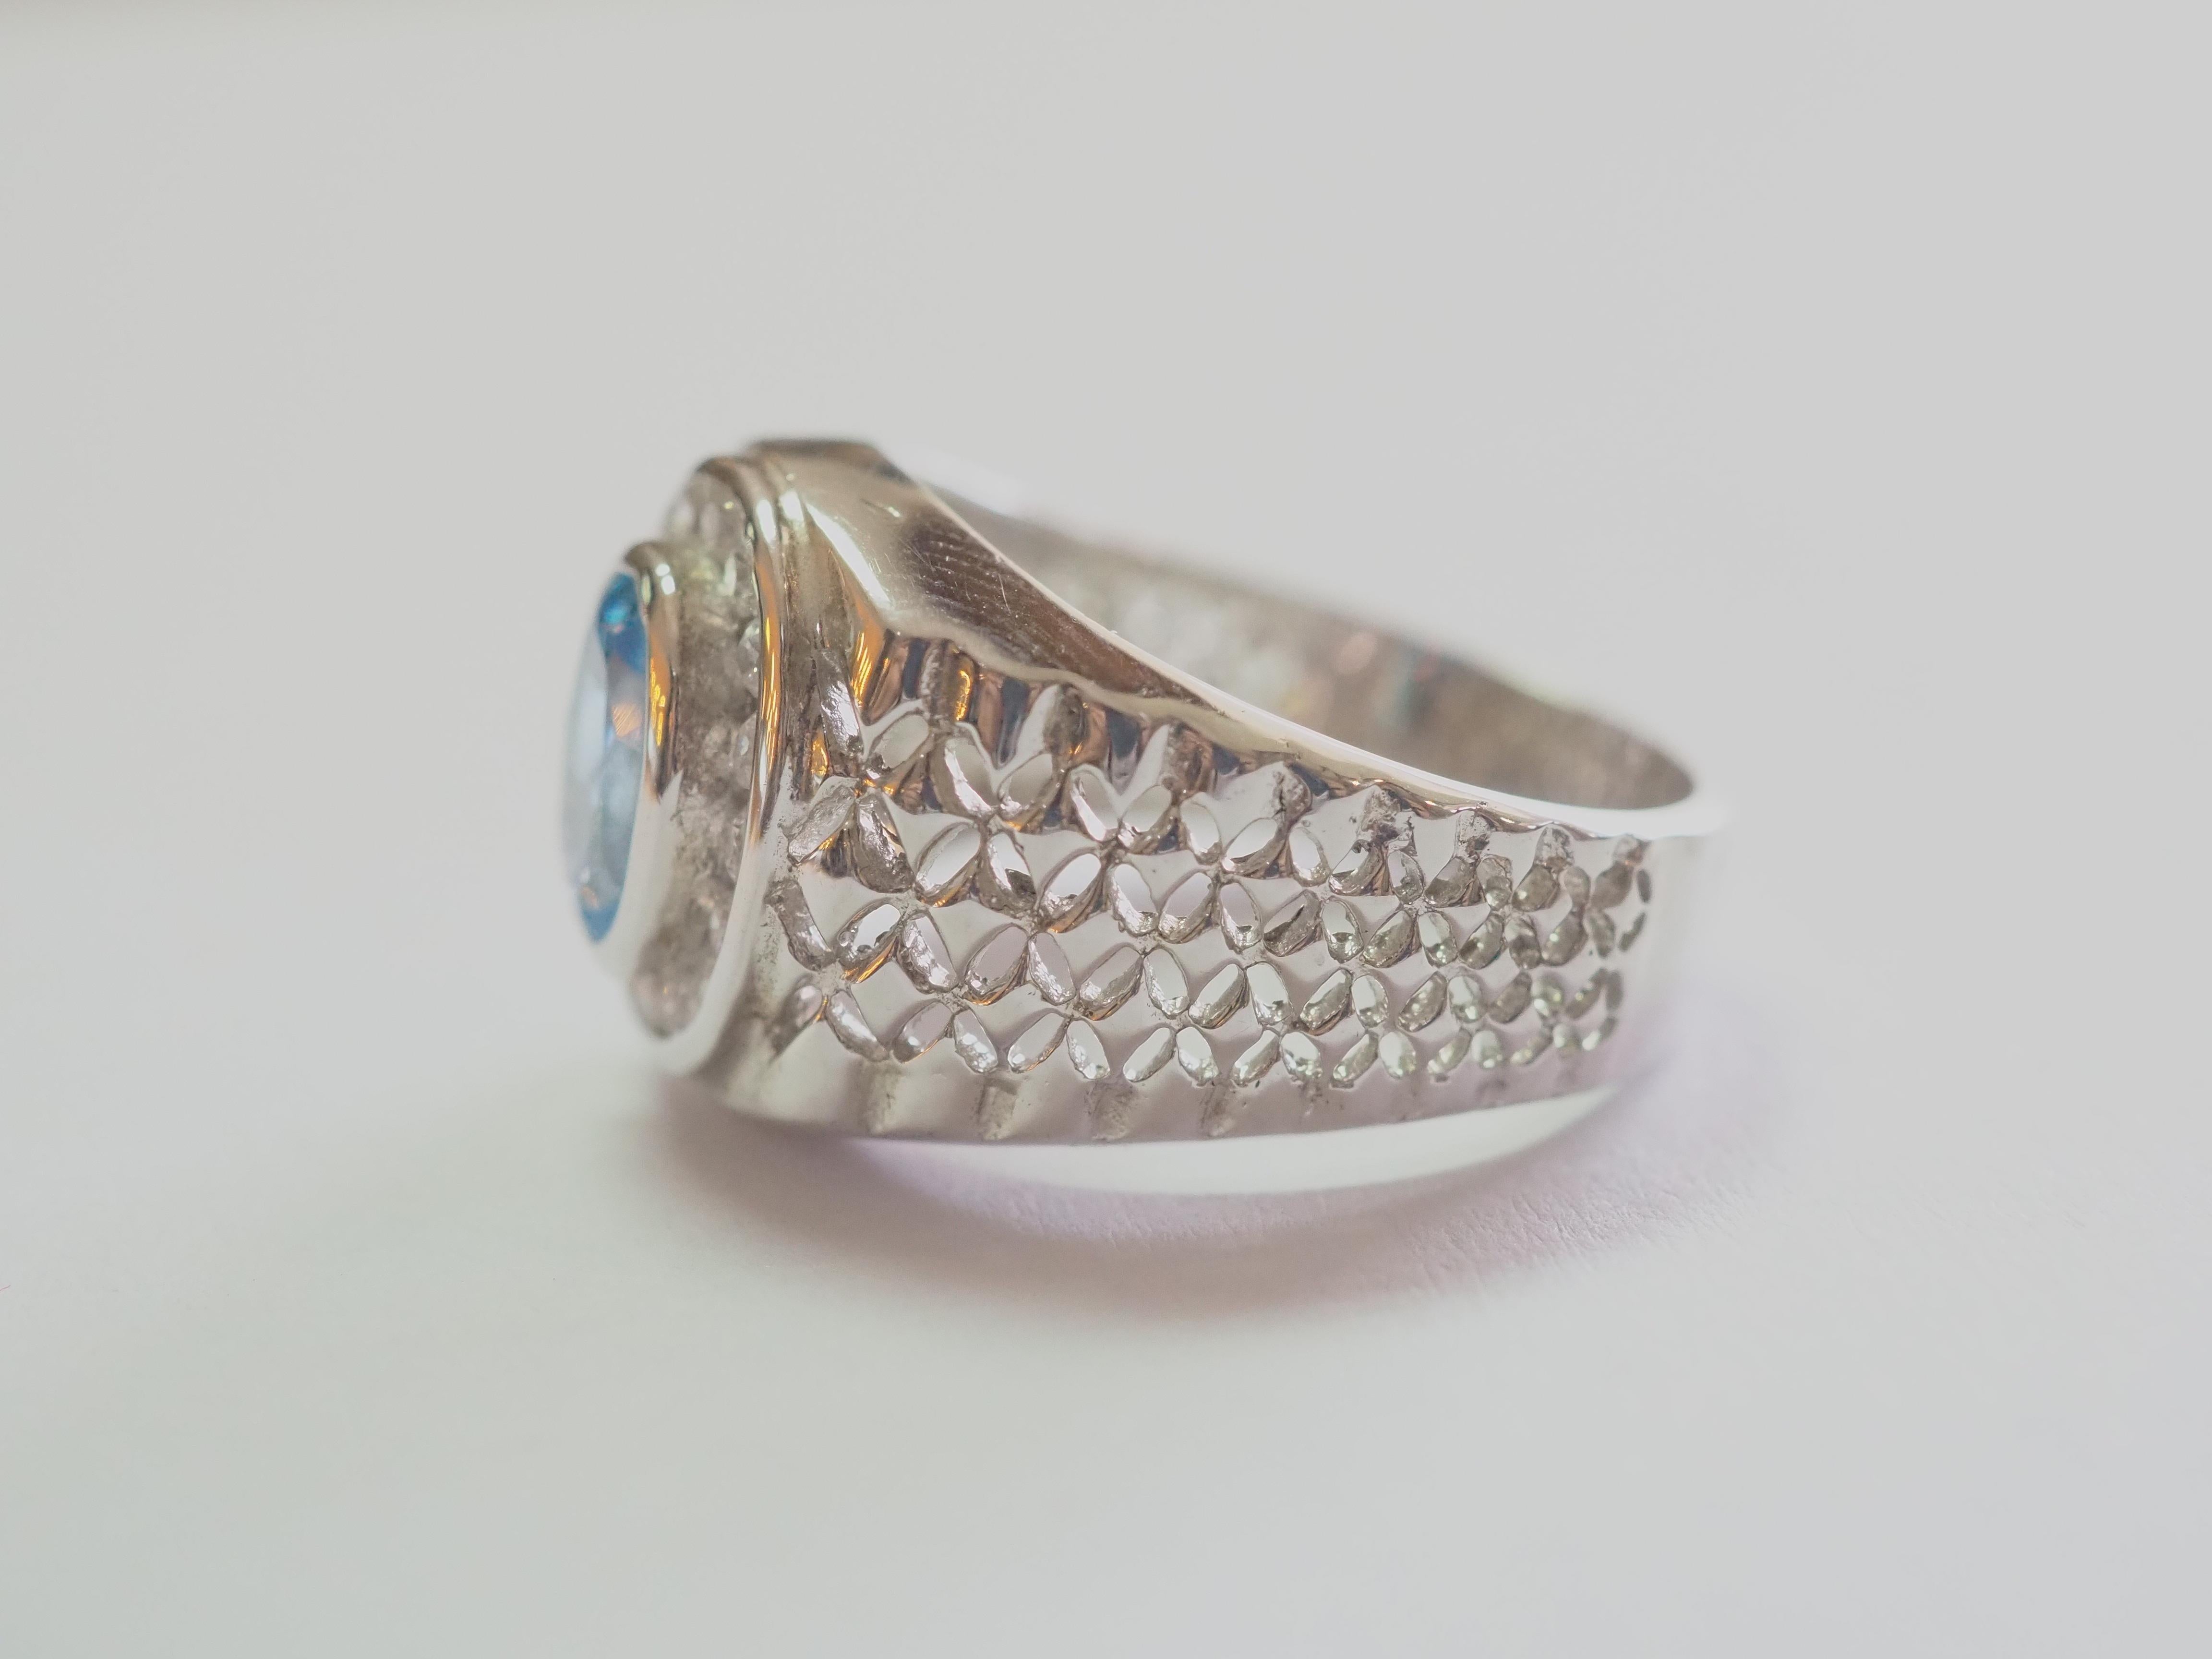 This ring is a stunning signet ring in solid sterling silver. The ring is decorated by natural oval blue topaz bezel set in the middle. The surrounding white stones are cubic zirconia. The unique engraving pattern on the band is good to look at. The